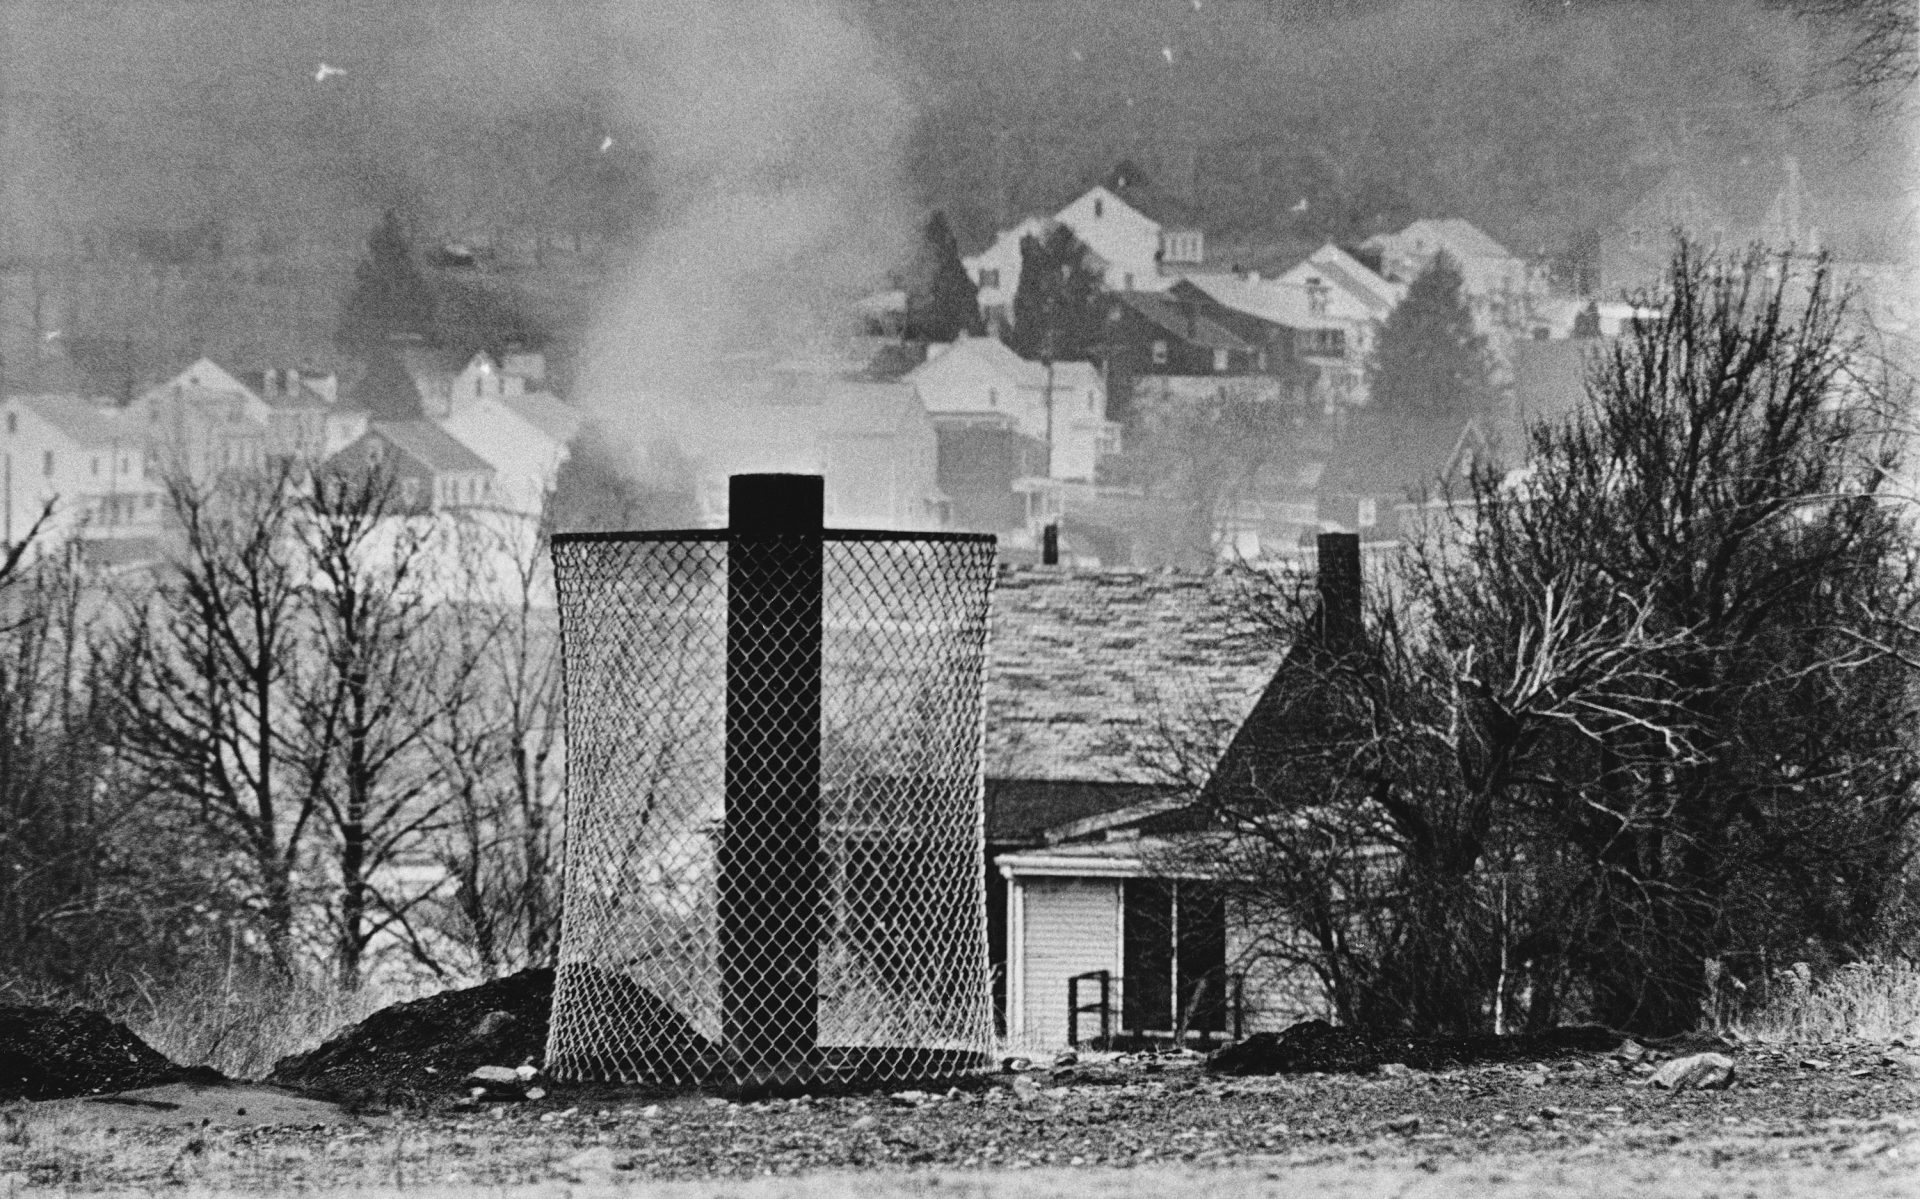 Smoke rises from the ground in this general view of Centralia, Pennsylvania on Jan. 26, 1983 where an uncontrolled, 20-year-old underground mine fire is raging. A resident of the town says: "It's hell on earth."